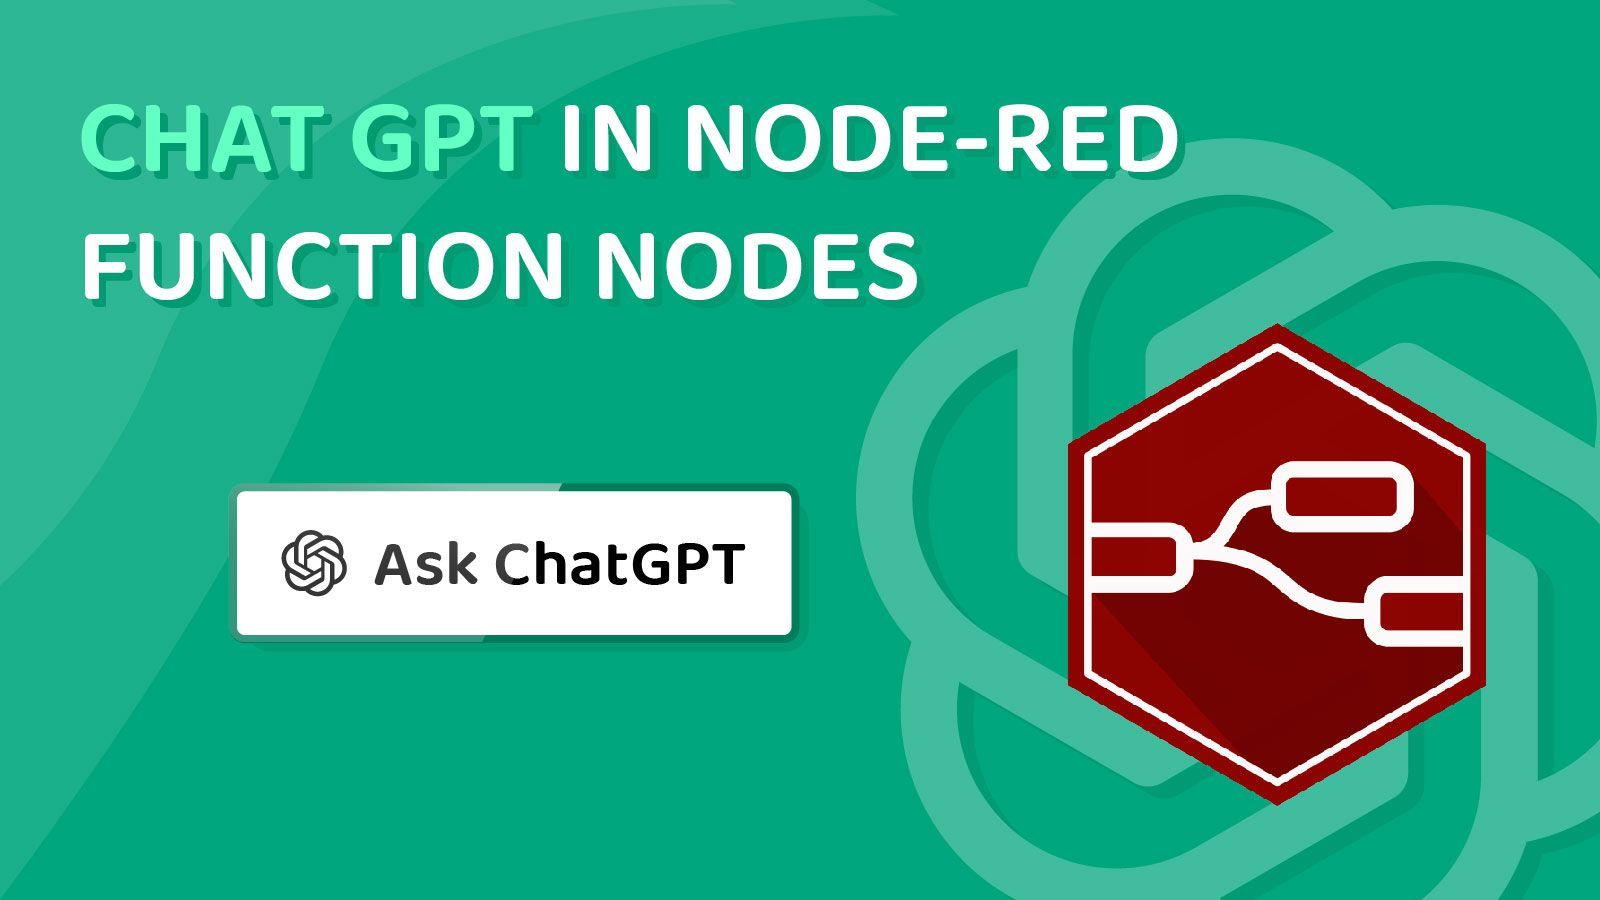 Image representing Chat GPT in Node-RED Function Nodes